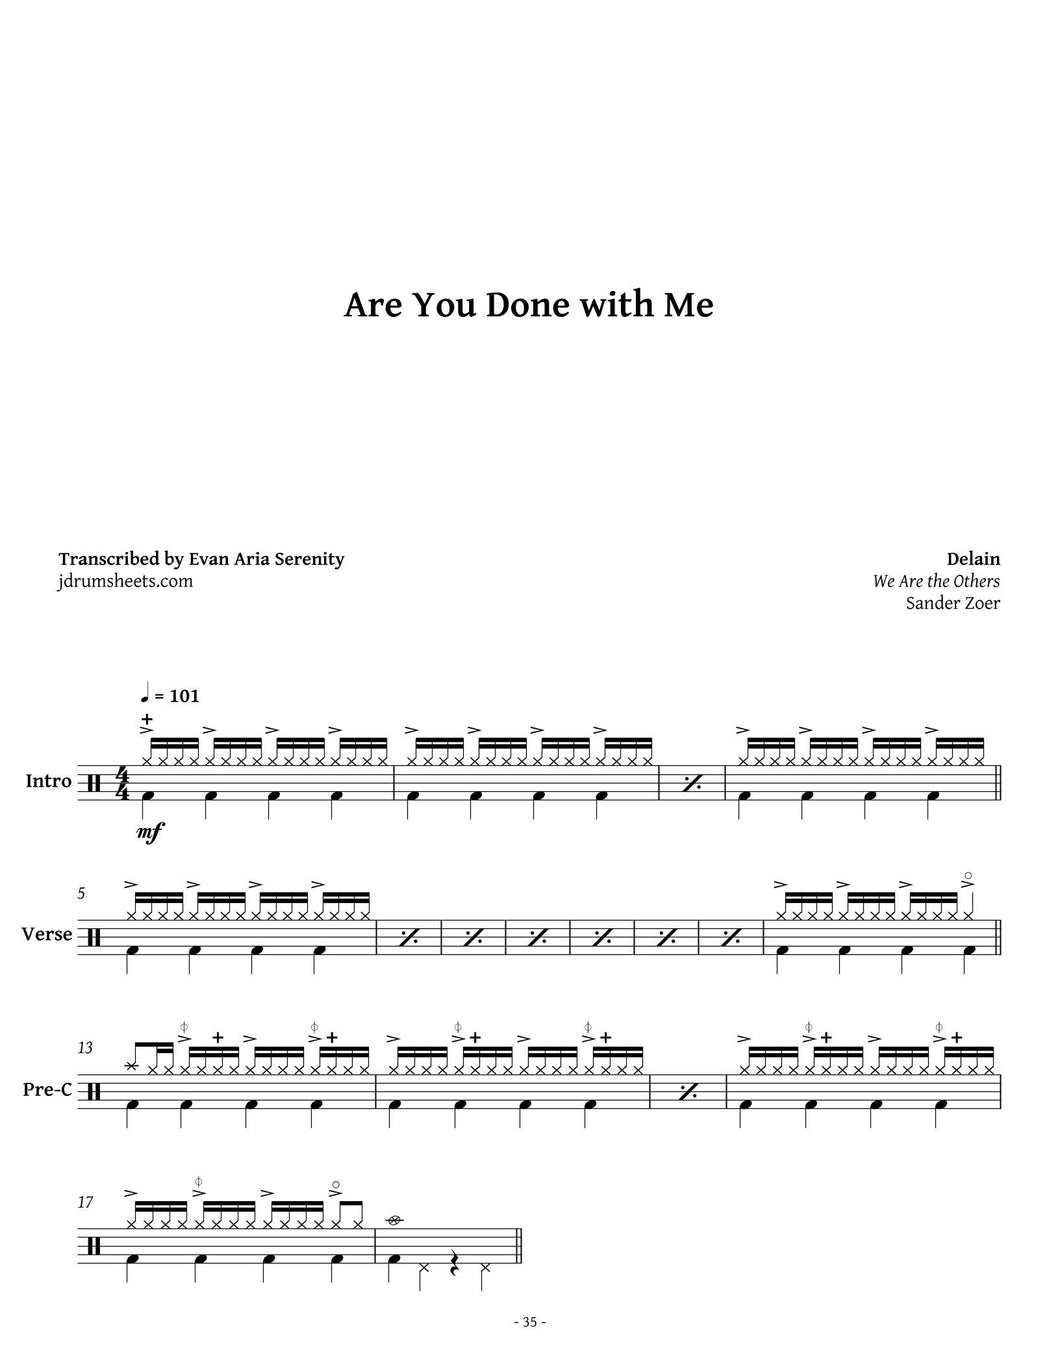 Are You Done with Me - Delain - Full Drum Transcription / Drum Sheet Music - Jaslow Drum Sheets